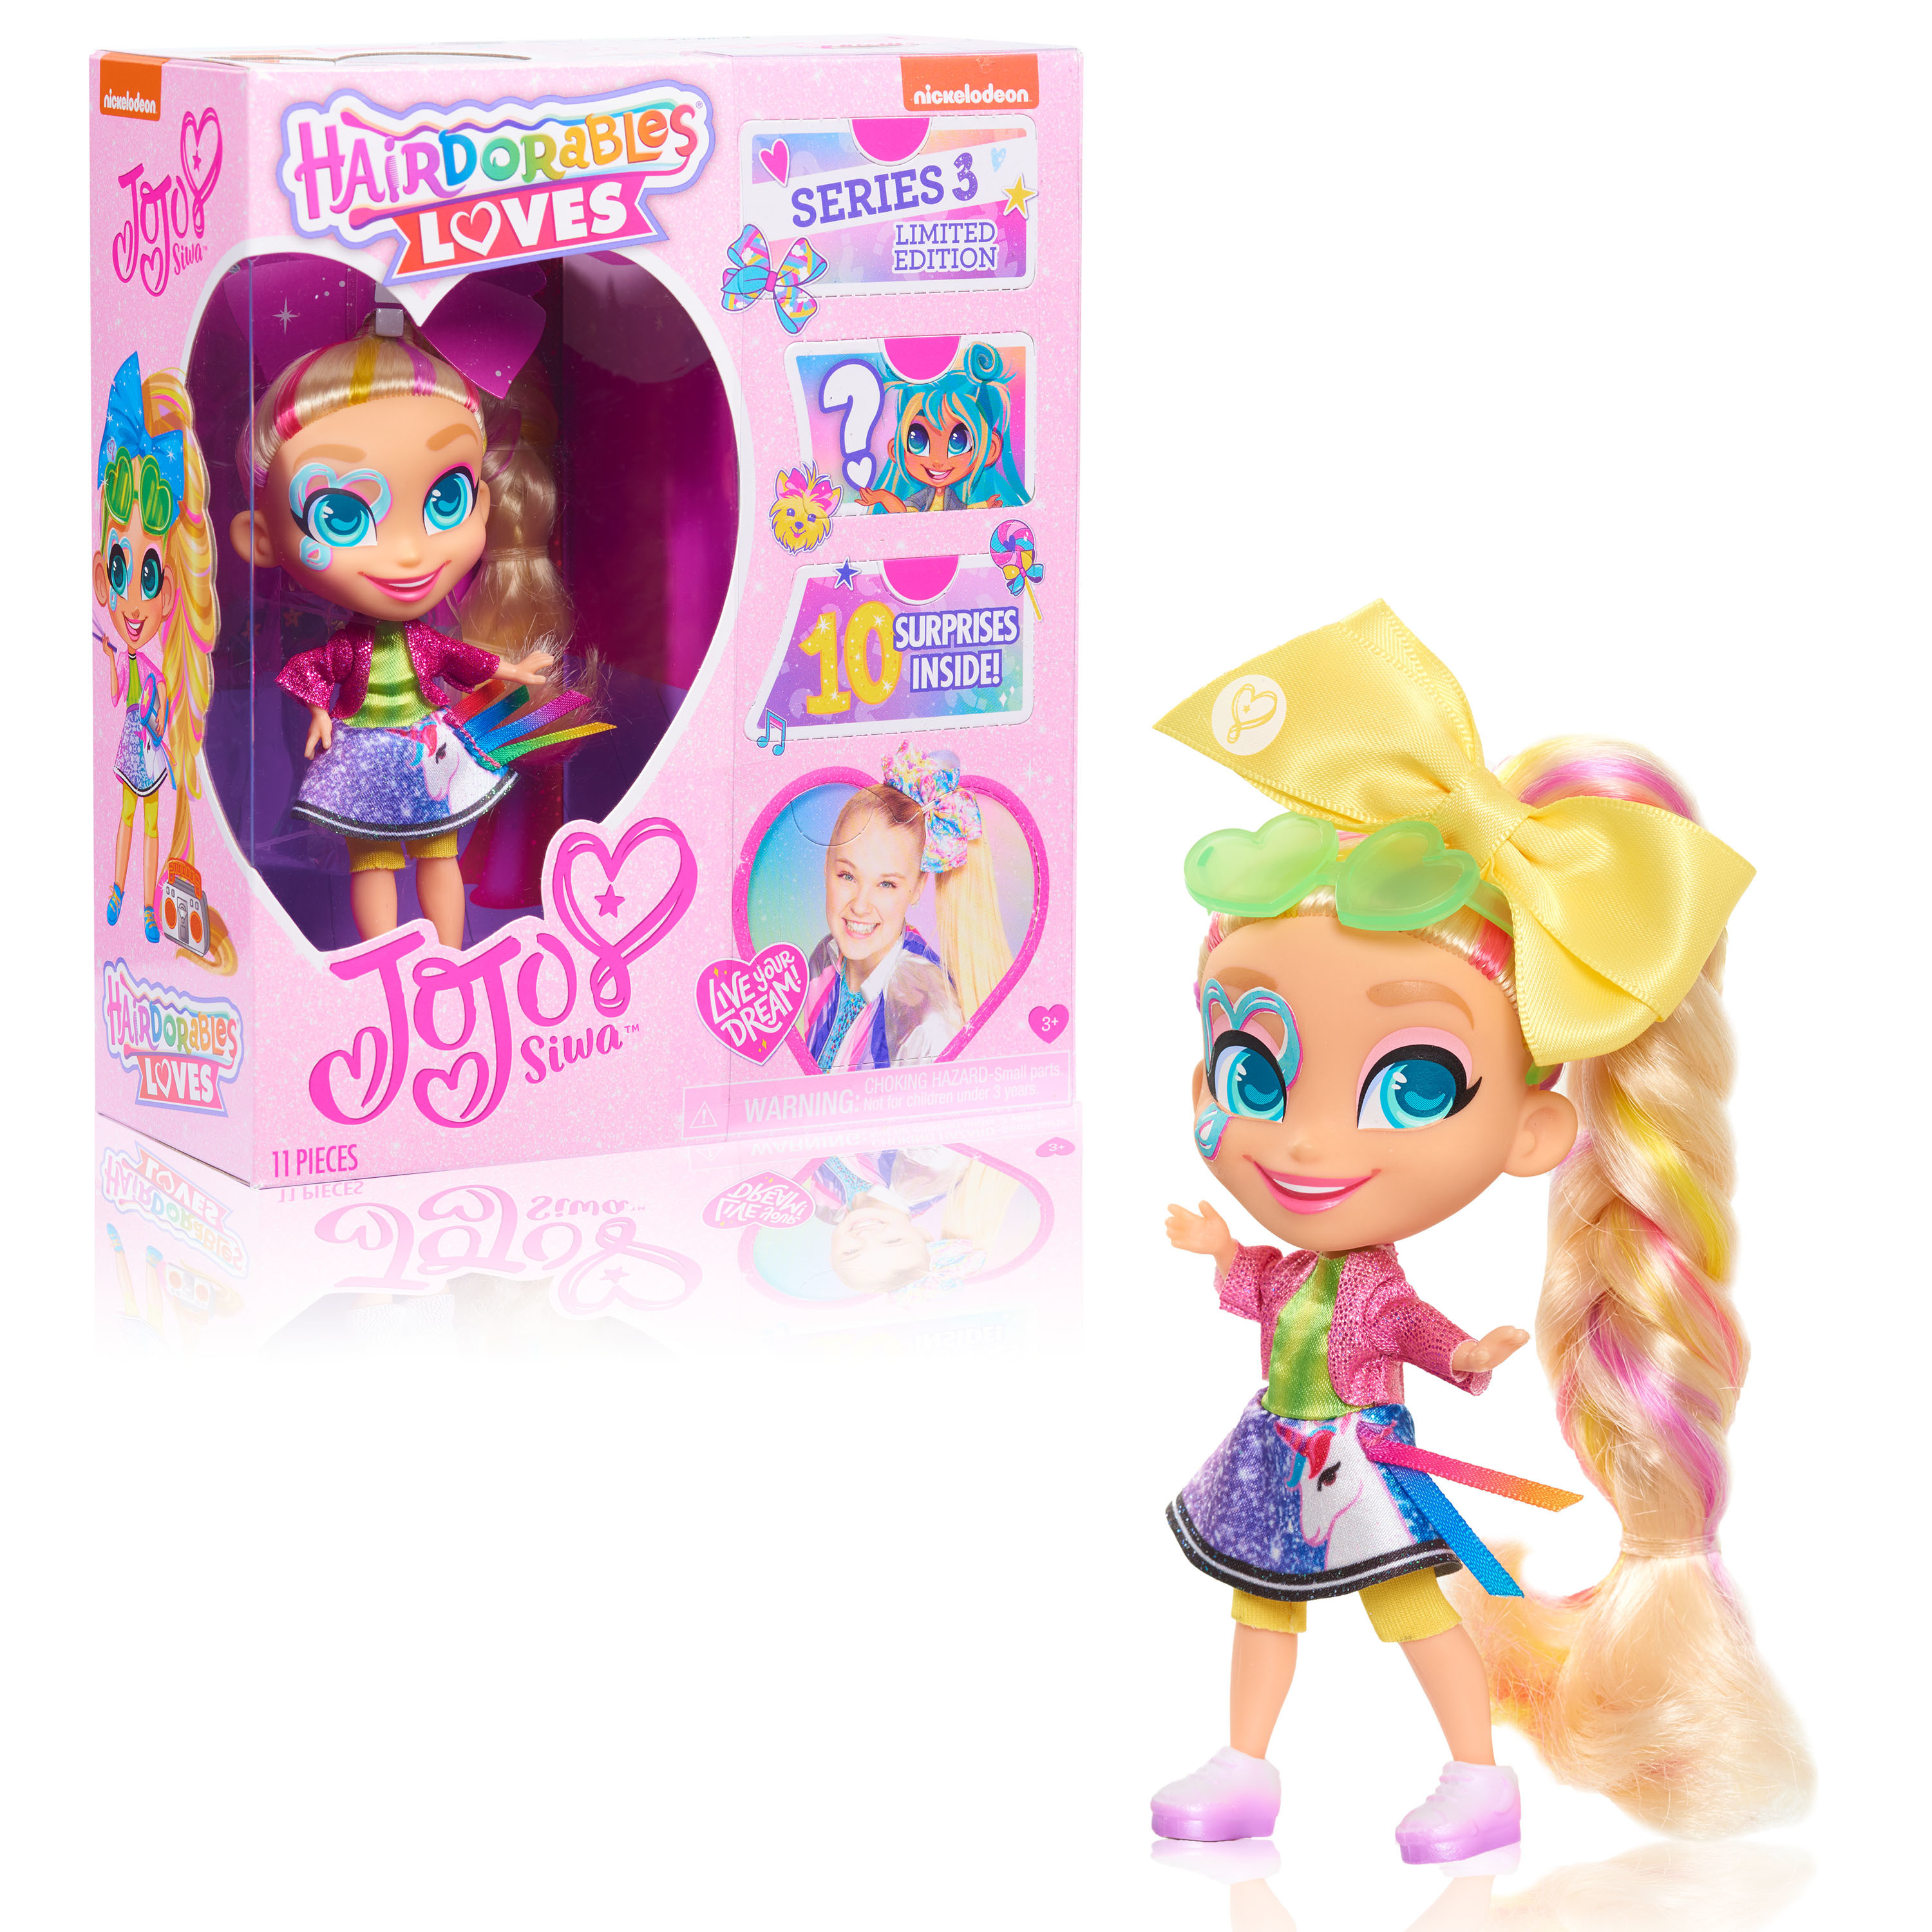 Hairdorables Loves JoJo Siwa, Unicorn Surprise, Includes 10 Surprise Accessories,  Kids Toys for Ages 3 Up, Gifts and Presents - image 1 of 3